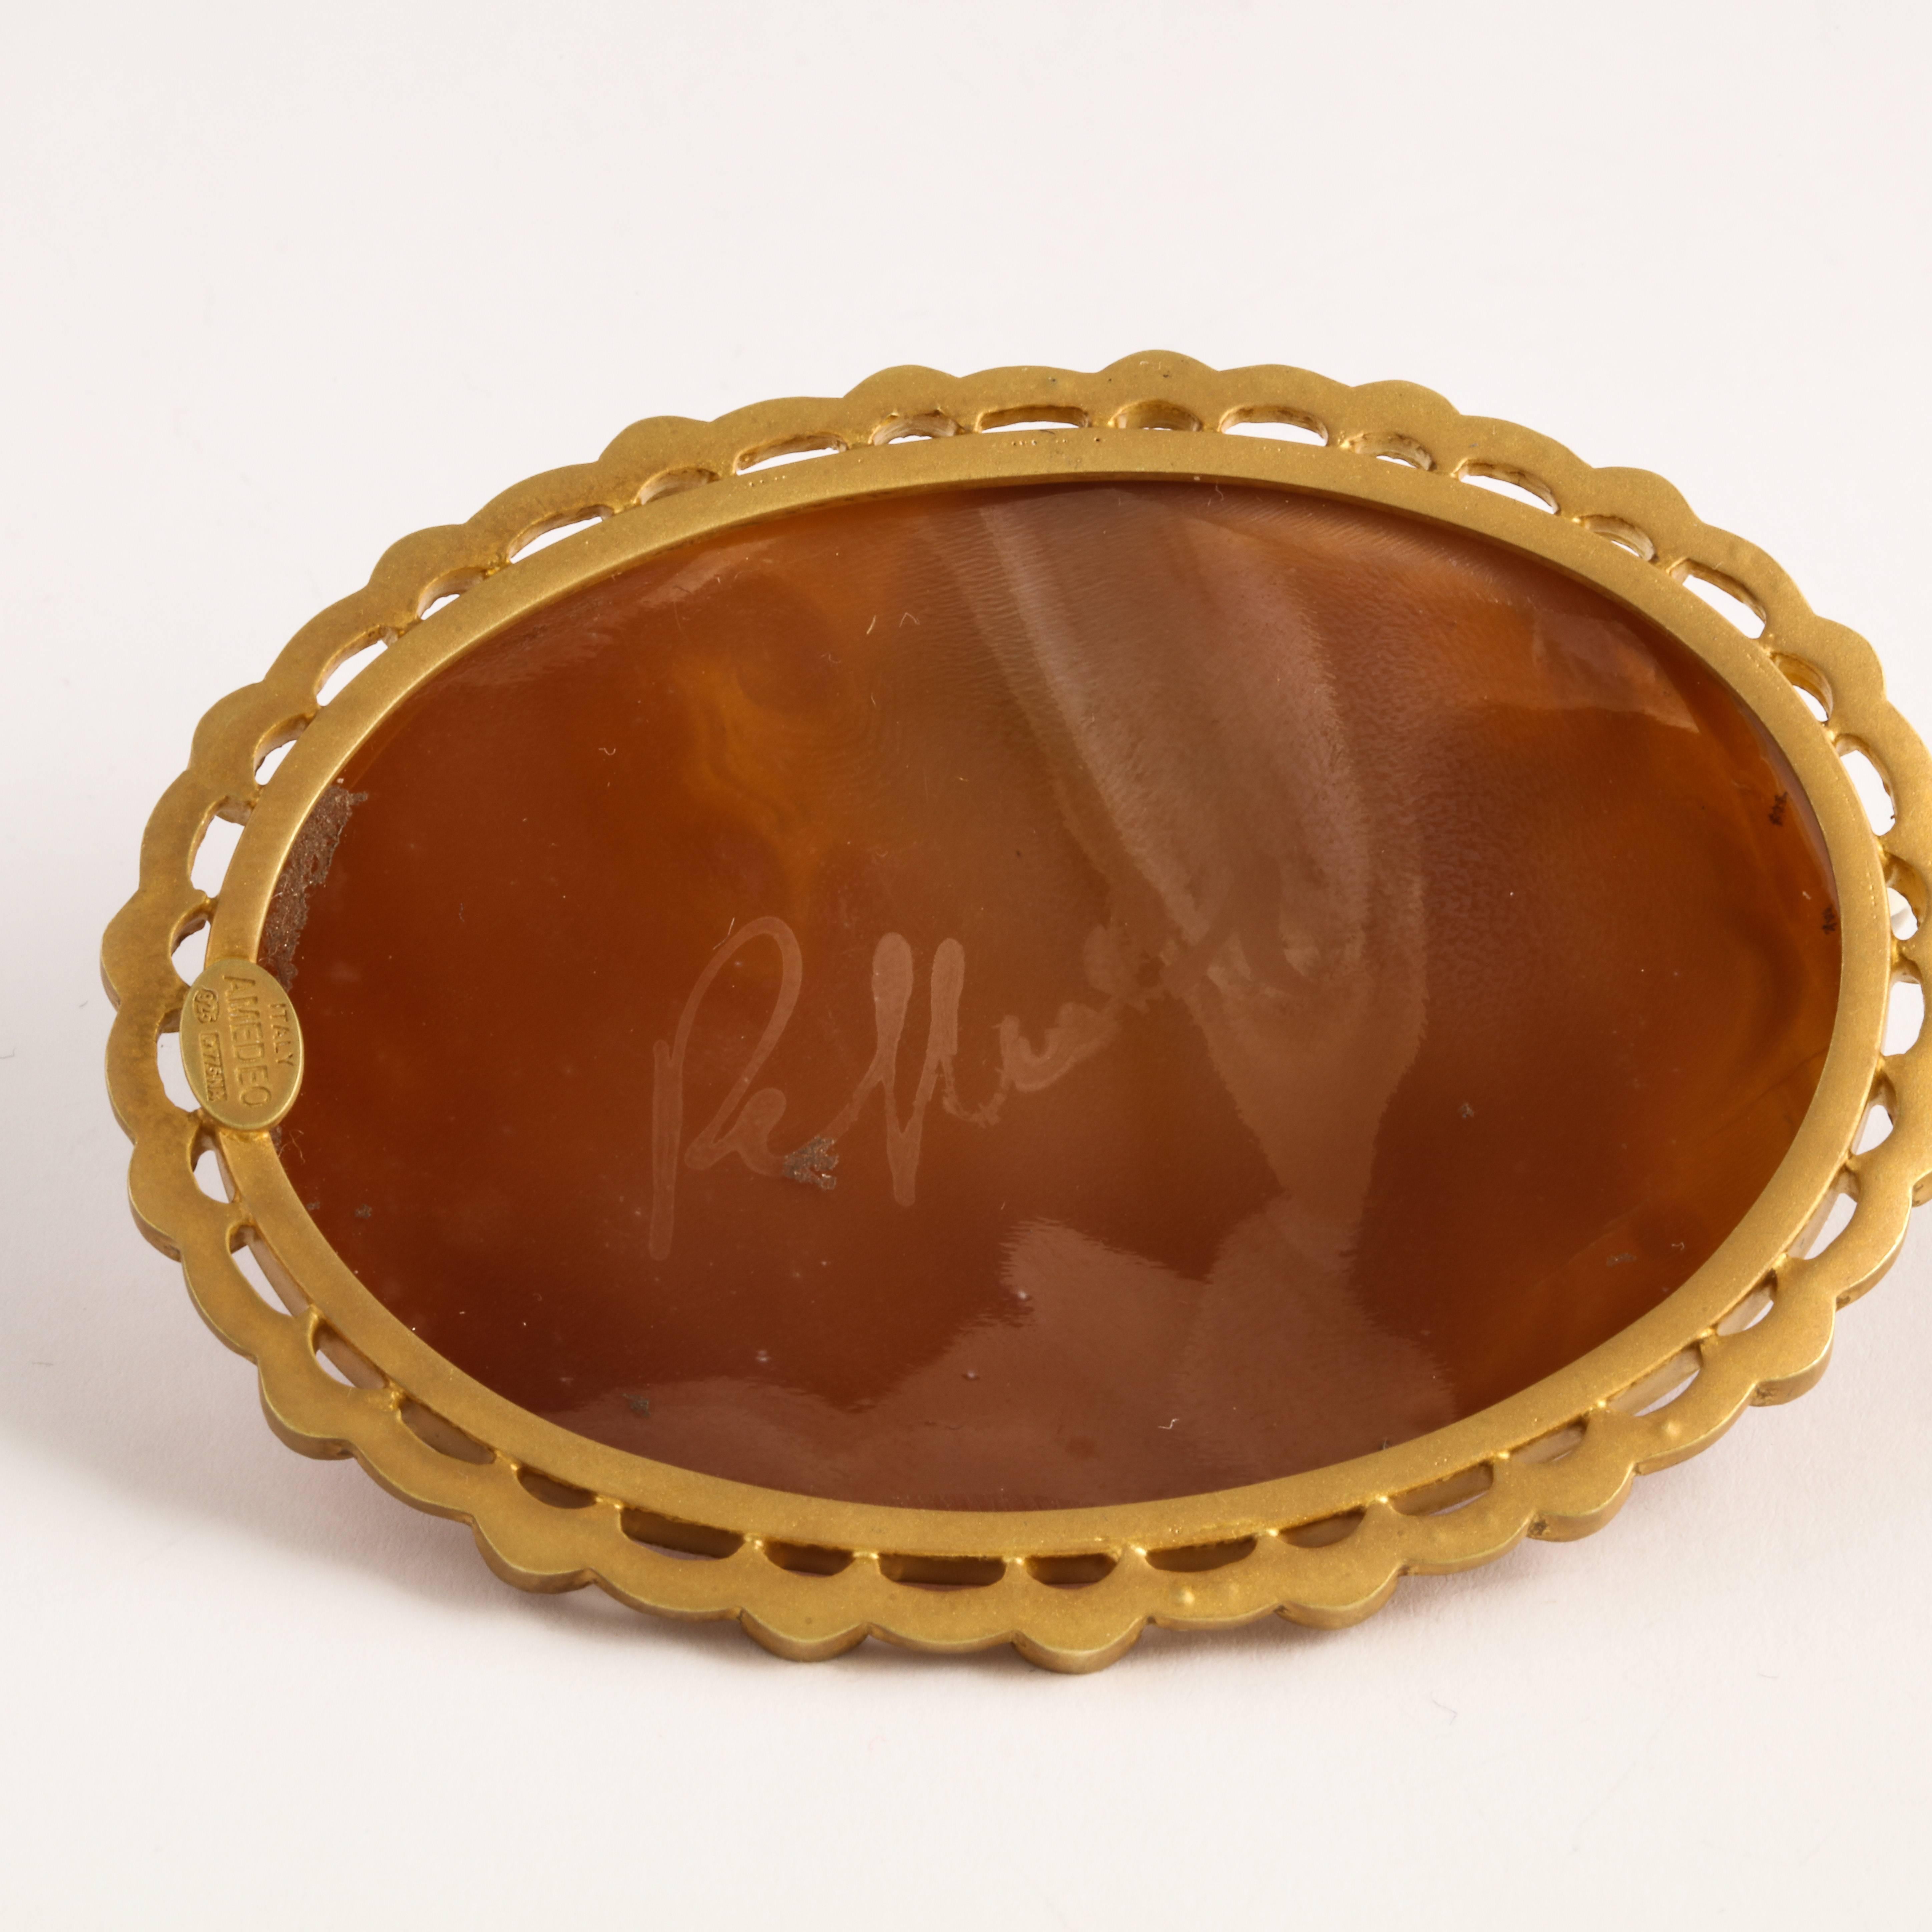 60mm sardonyx cameo shell, hand-carved set in sterling silver, gold plated with black diamonds.